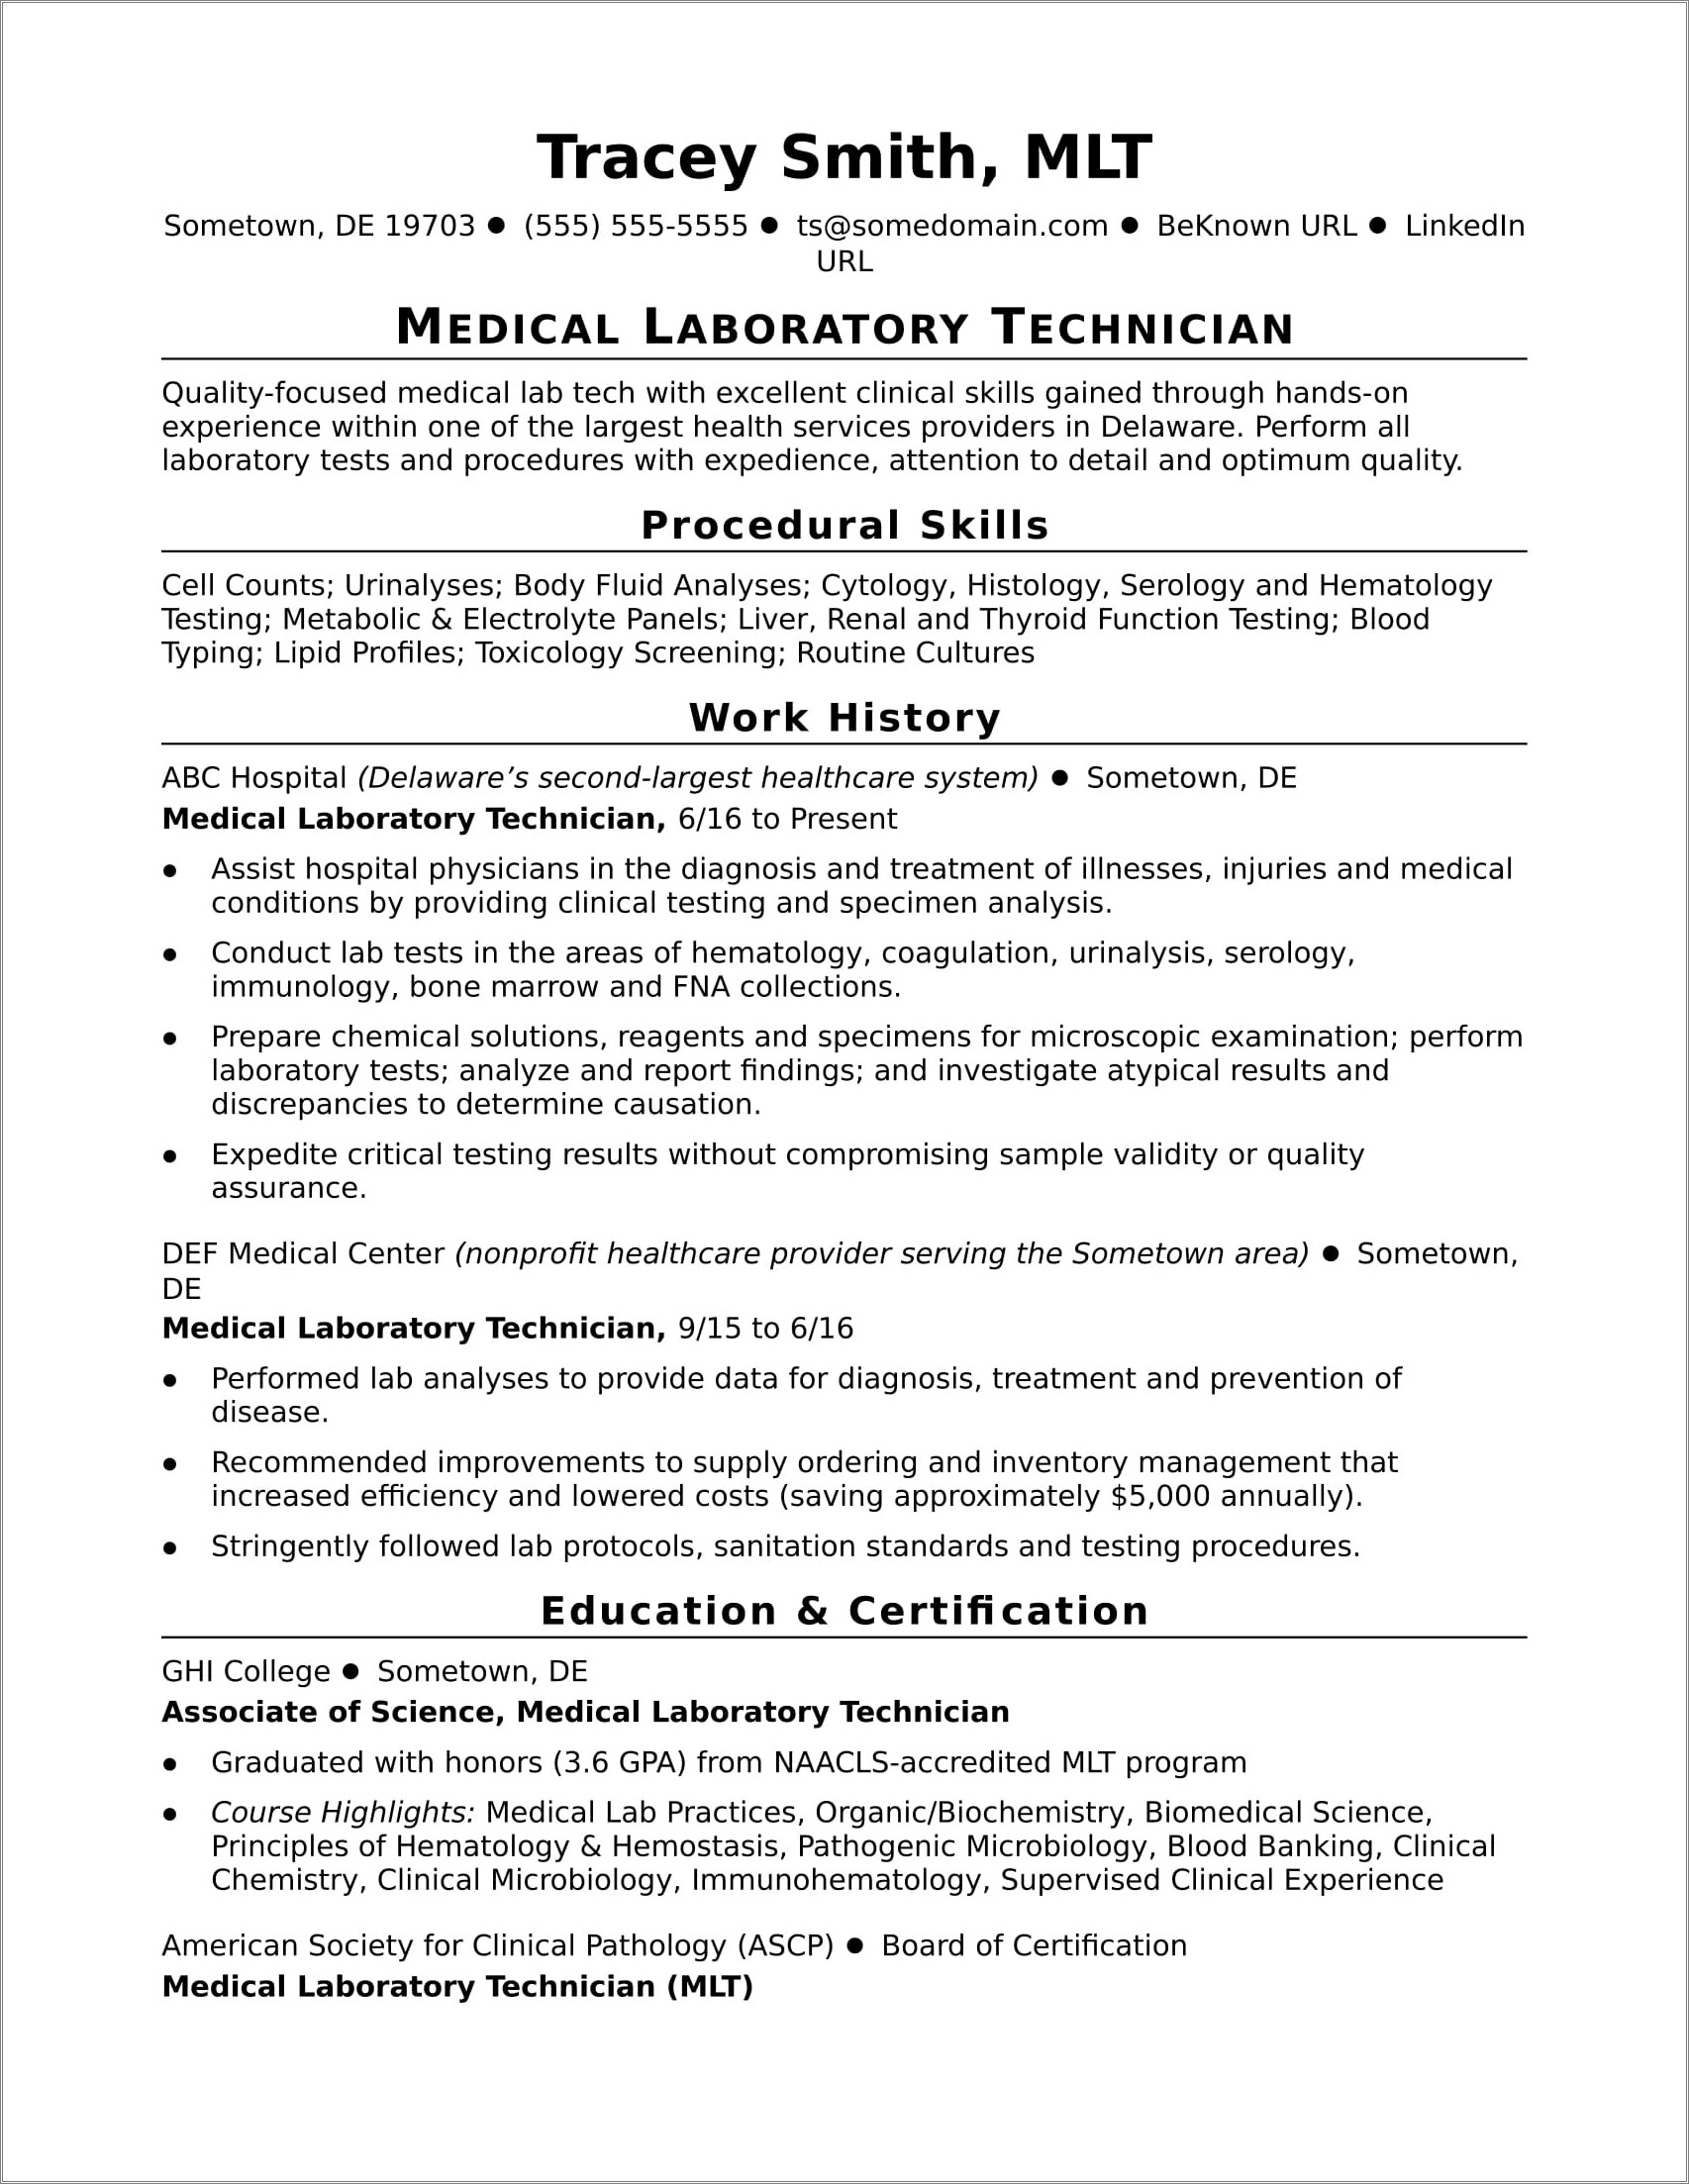 A Resume That Includes Work History And Skills